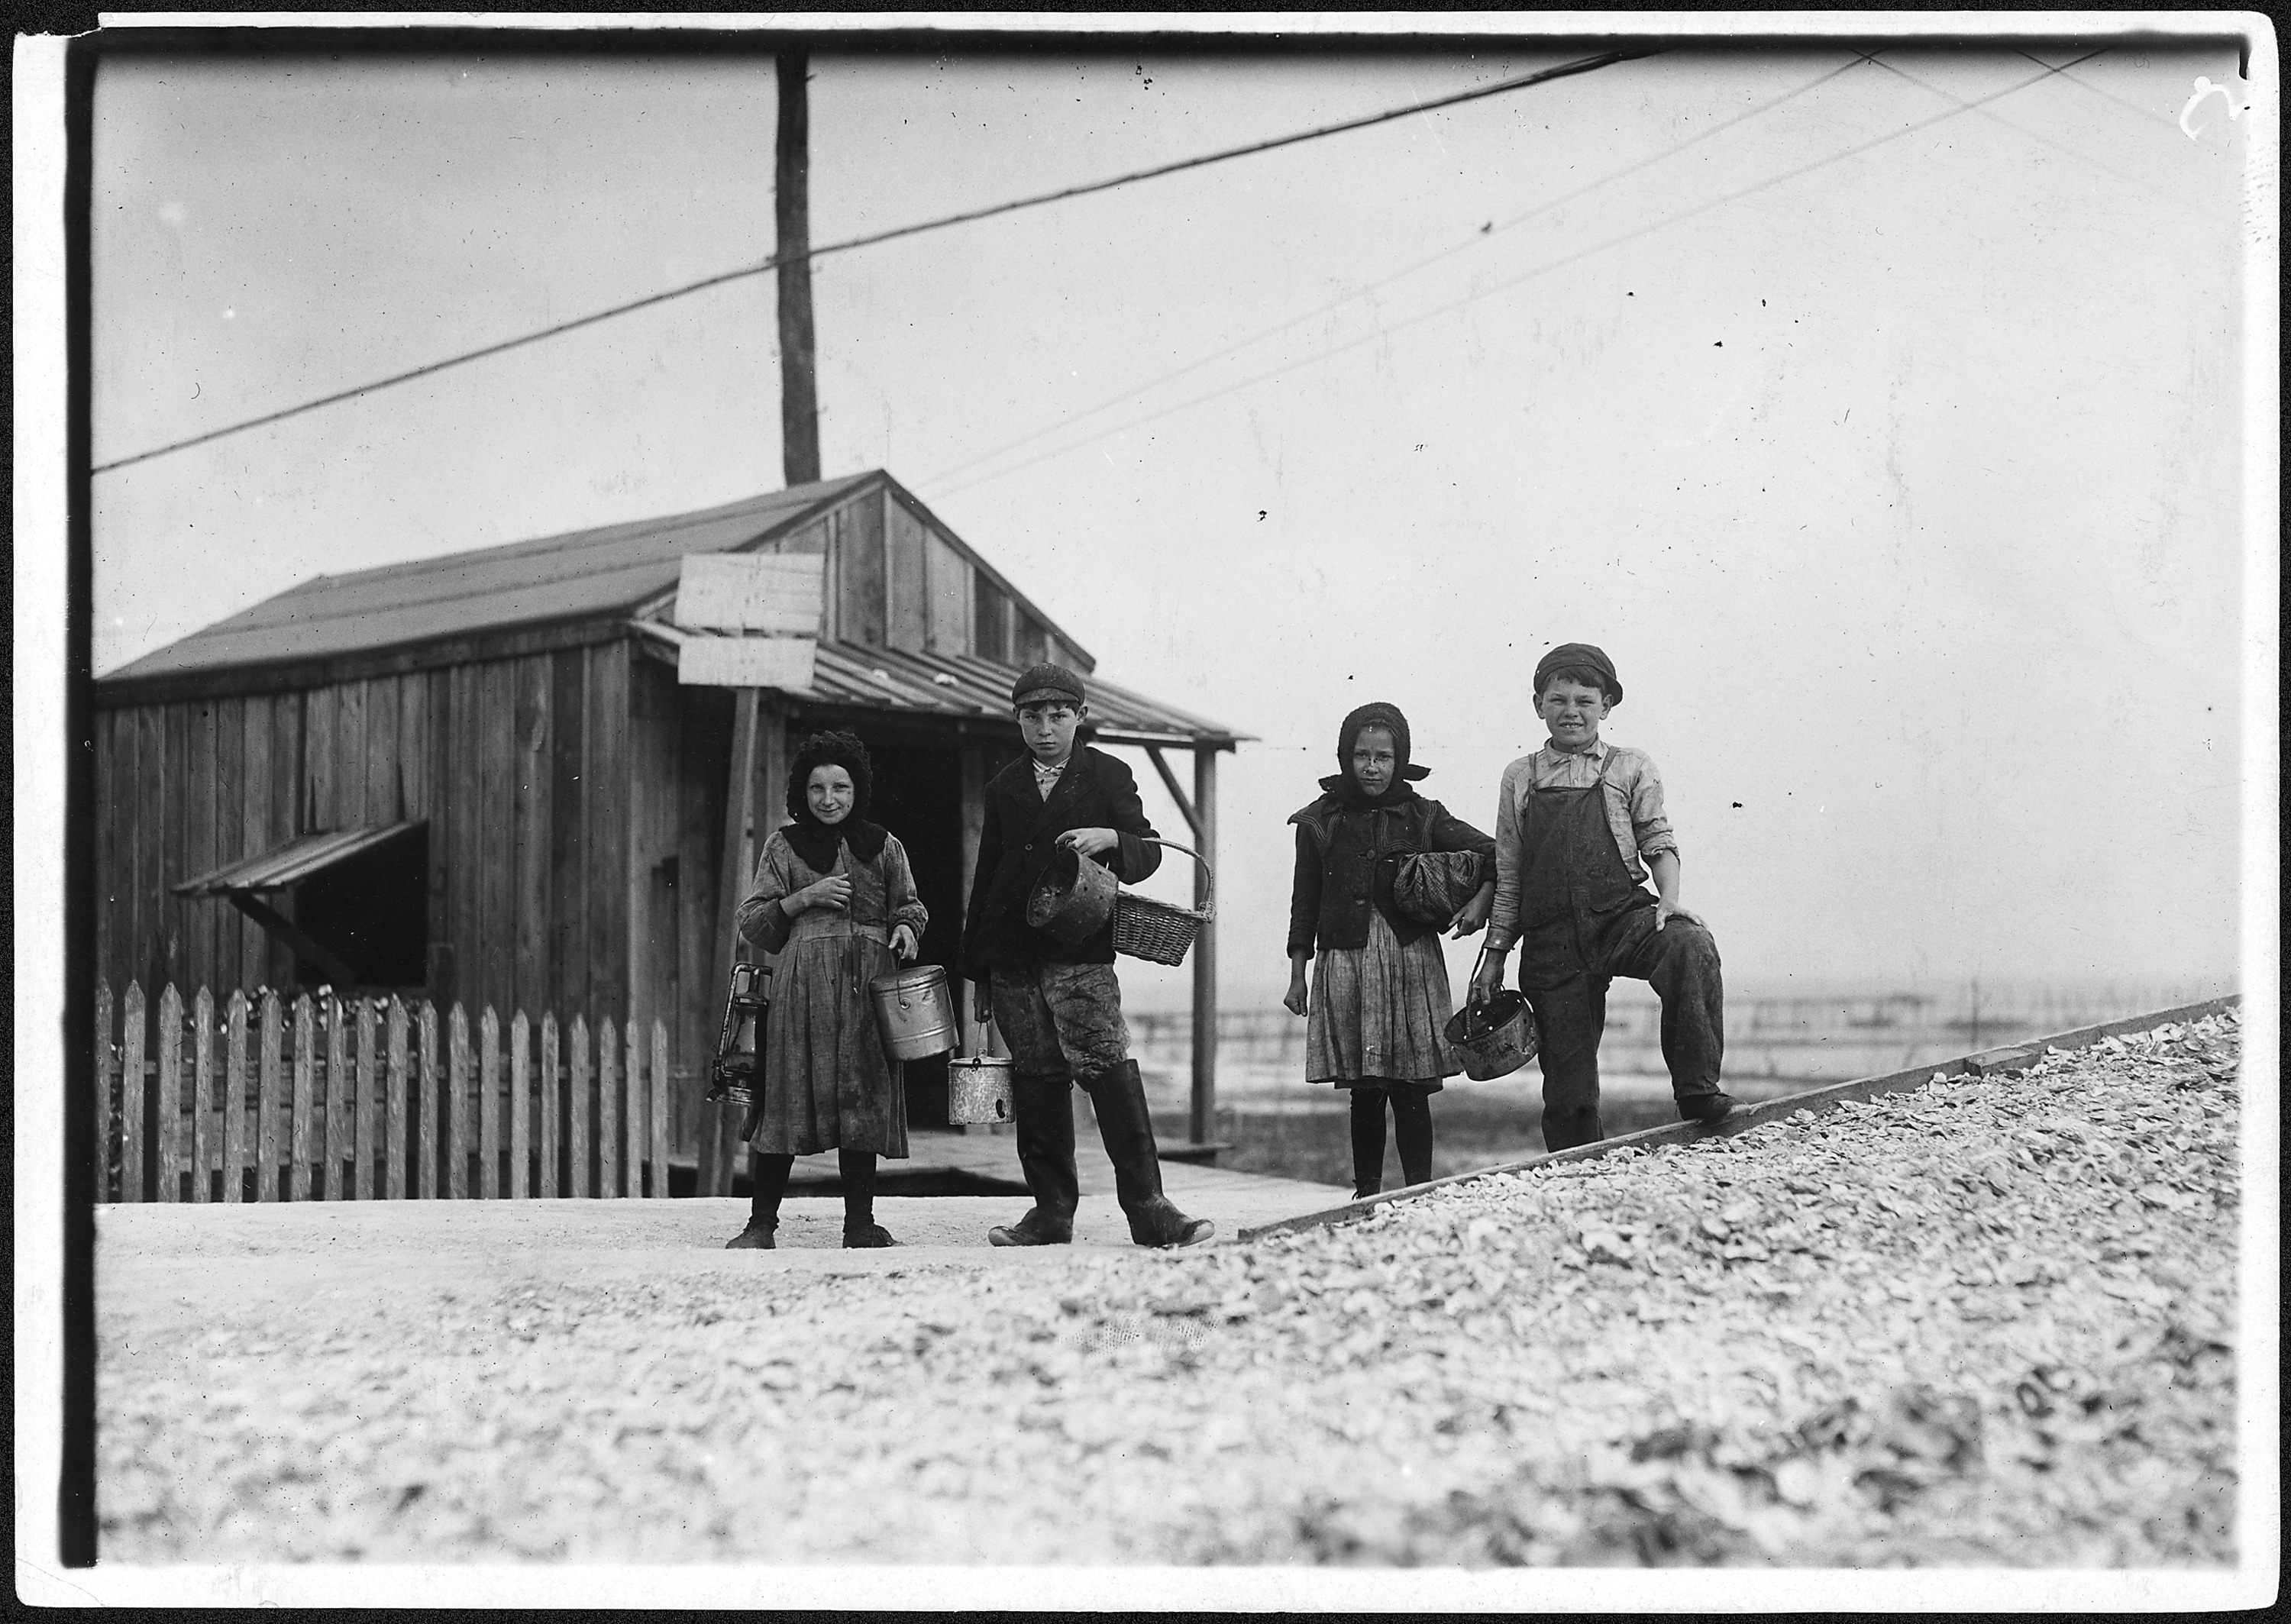 Young oyster shuckers. Pass Christian, Miss. - NARA - 523408